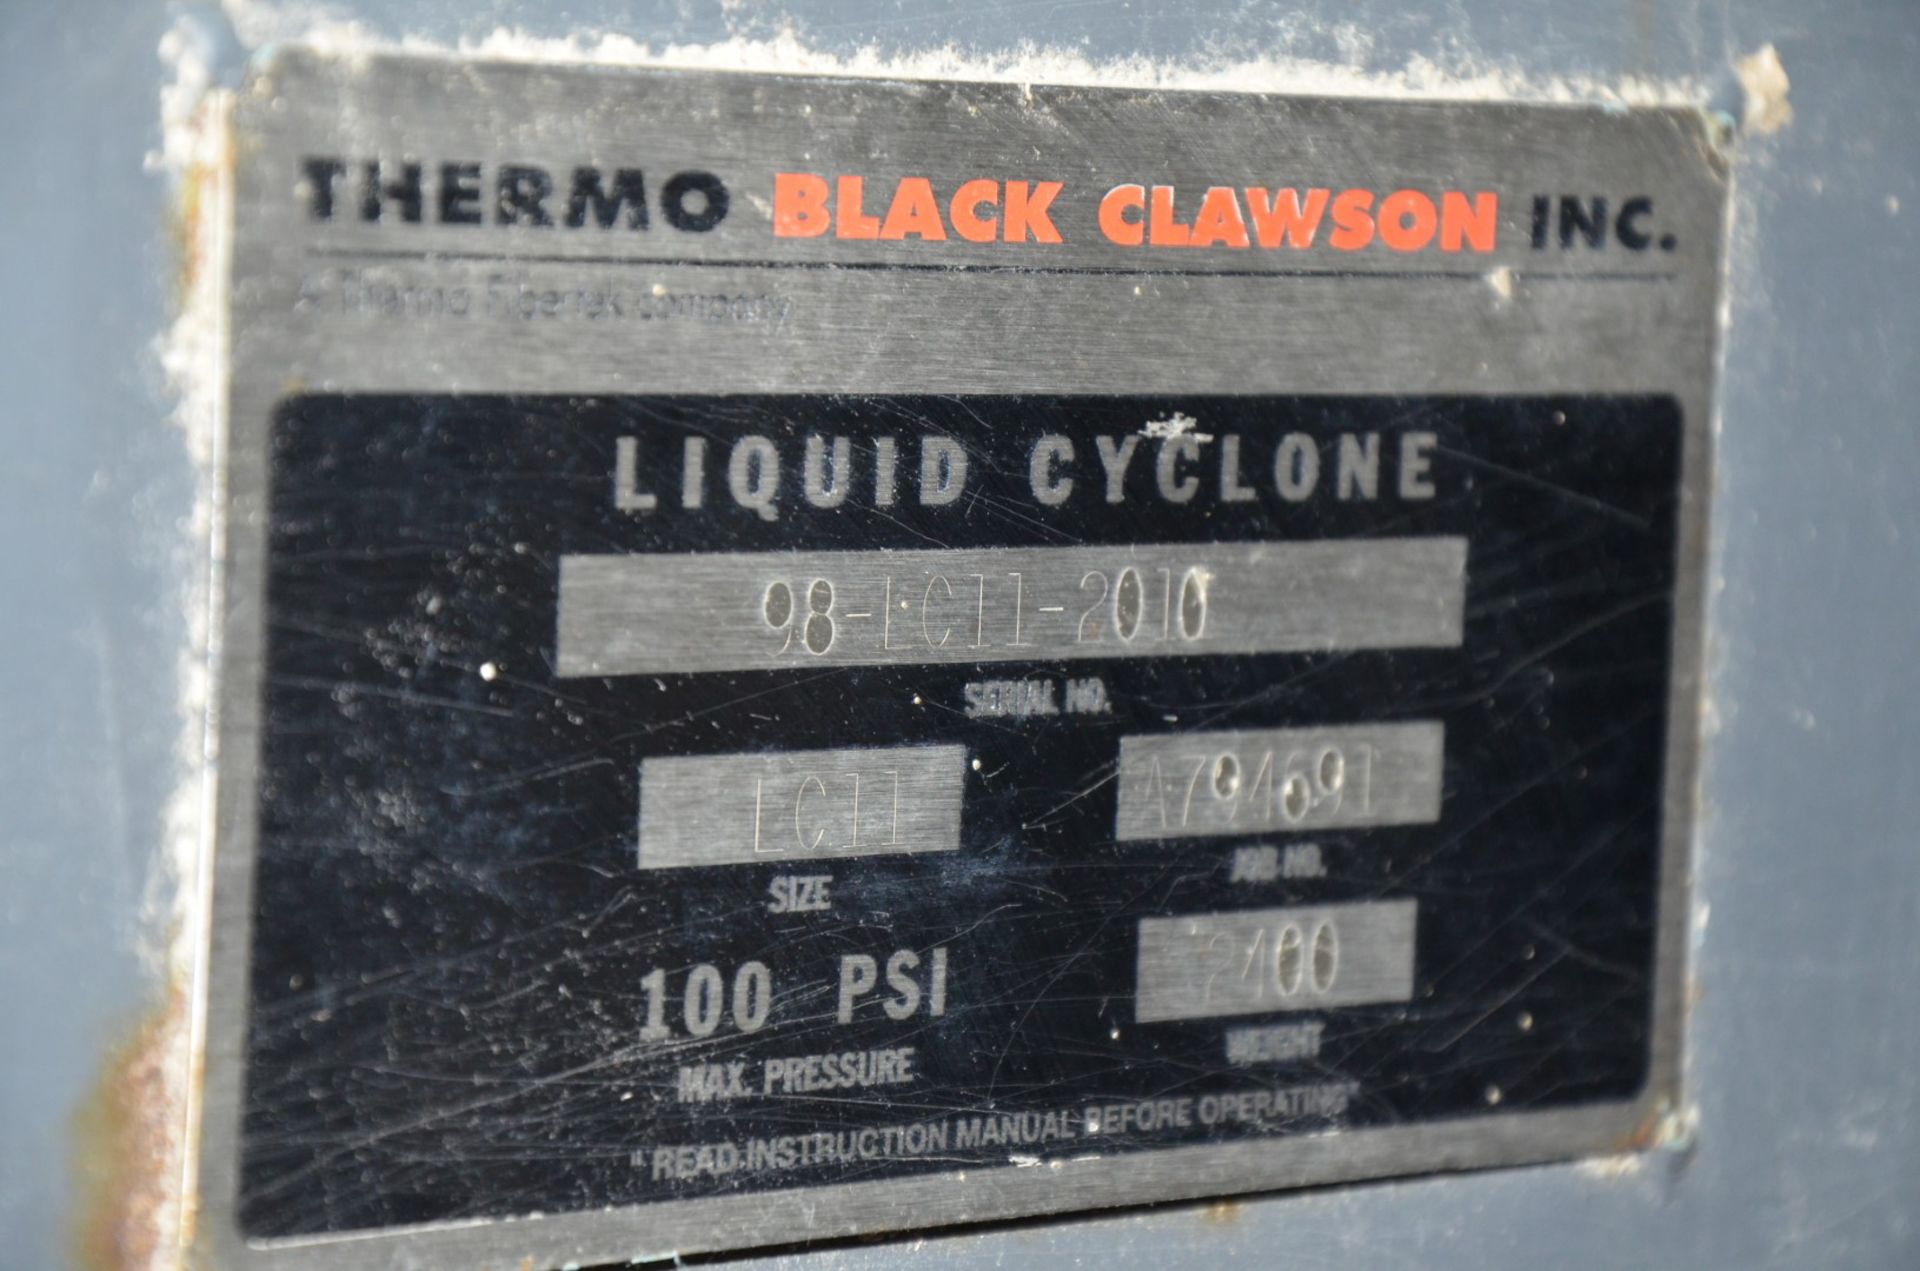 BLACK CLAWSON HDC COMPLETE LC-11 17" DIA DETRASHING LIQUID CYCLONE HIGH DENSITY CLEANER WITH 10" DIA - Image 3 of 3